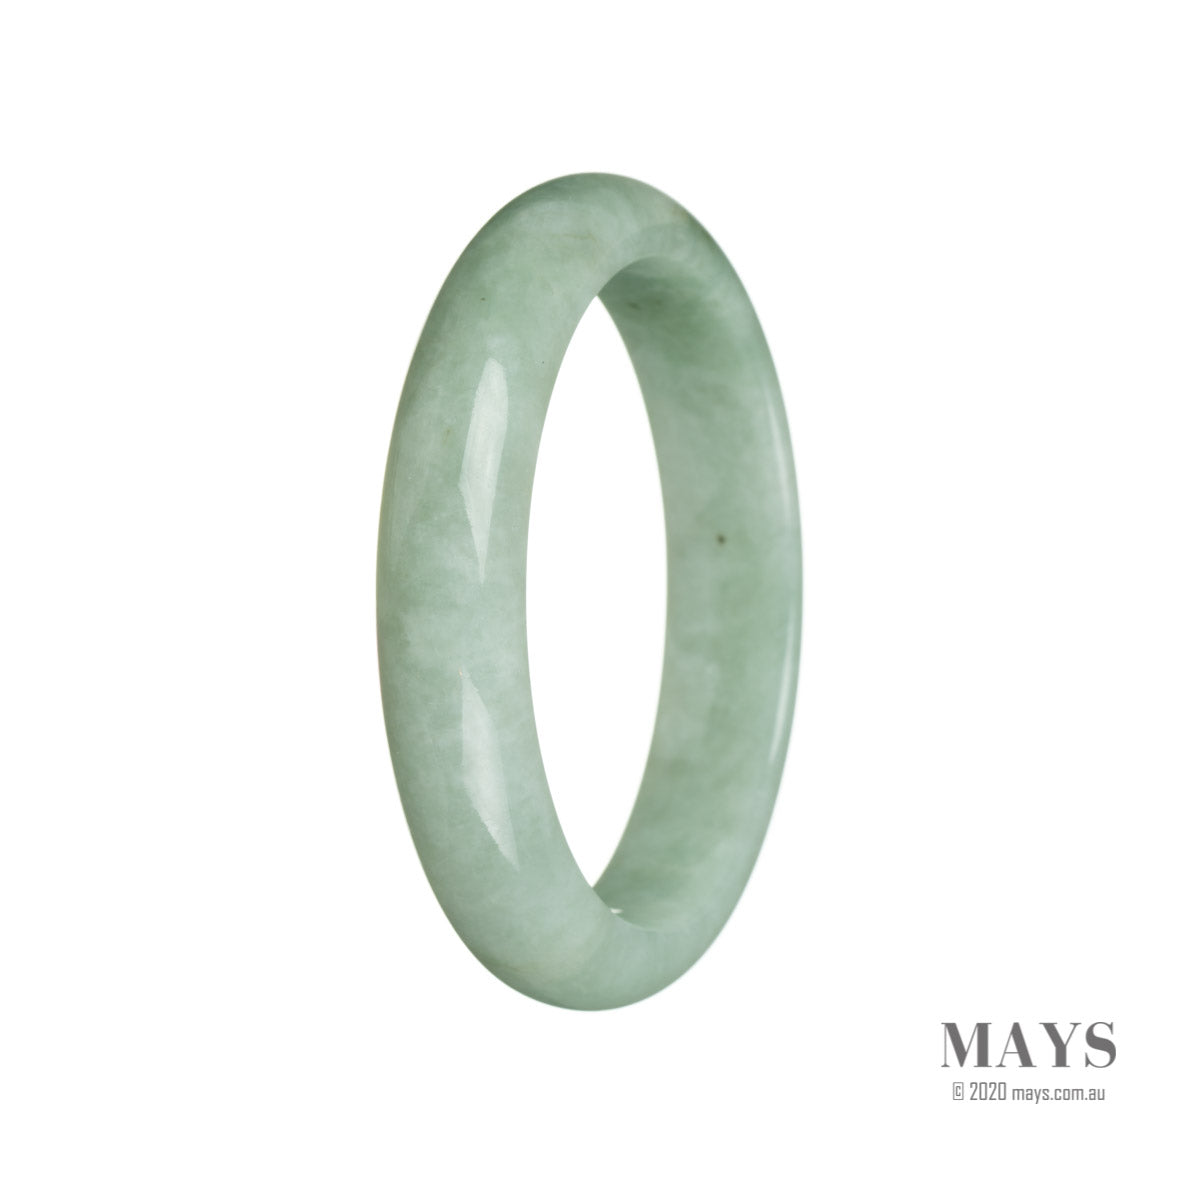 A close-up photo of a real green jade bangle with a semi-round shape, measuring 59mm in diameter. The bangle is smooth and polished, showcasing the natural beauty of the green jade stone. It features a Type A grade, known for its high quality and vibrant color. The brand name "MAYS™" is also mentioned.